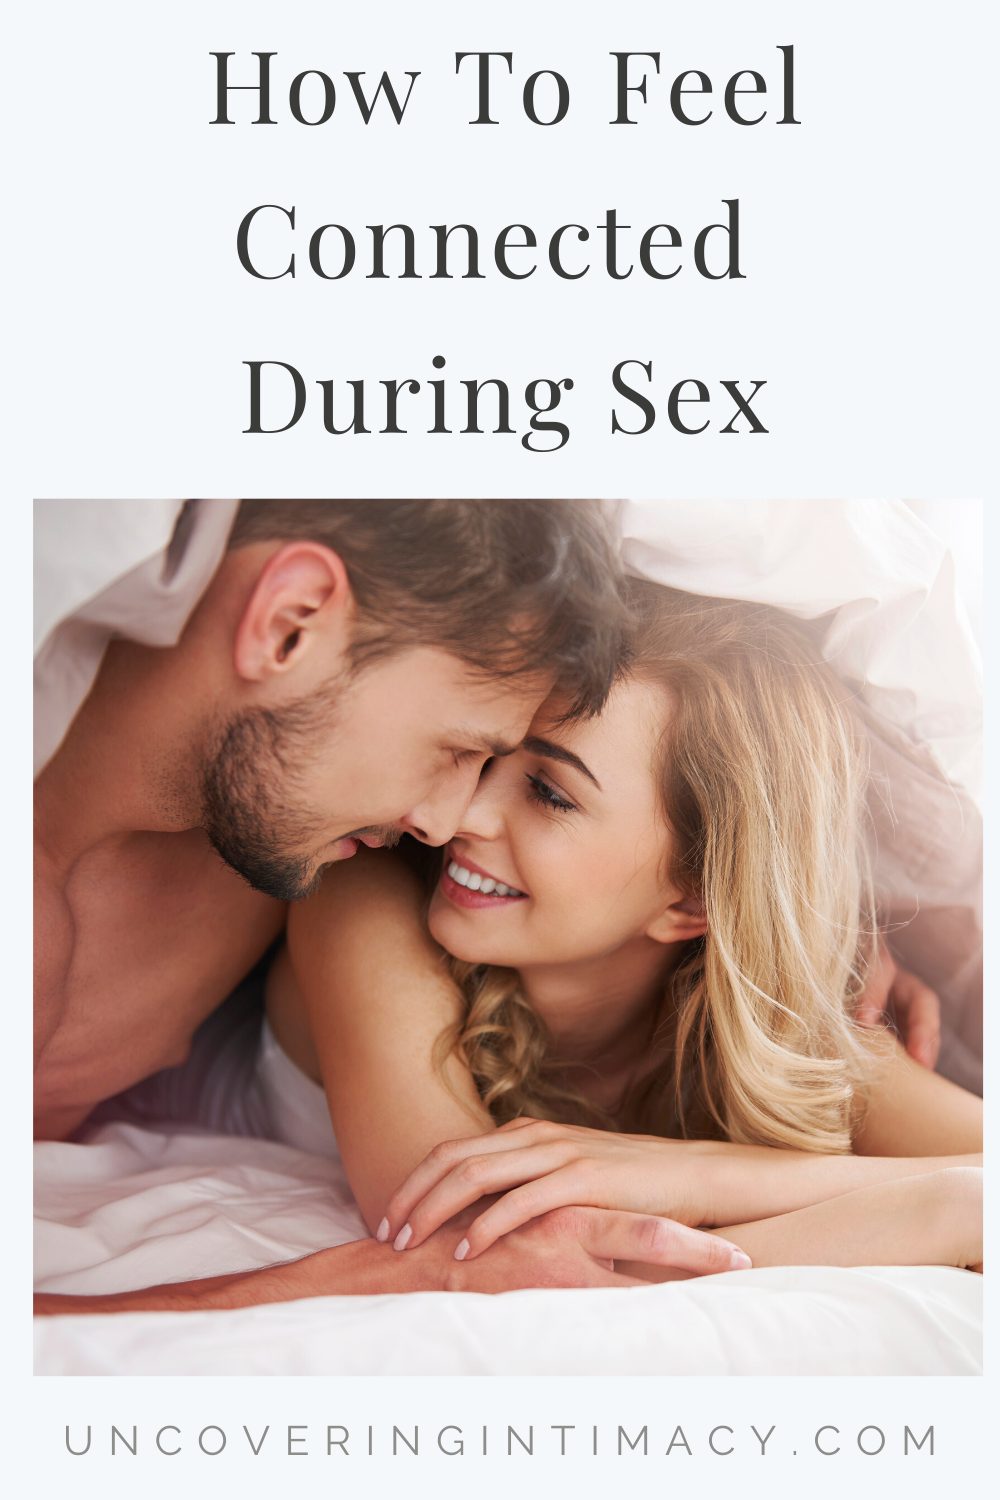 How to feel connected during sex